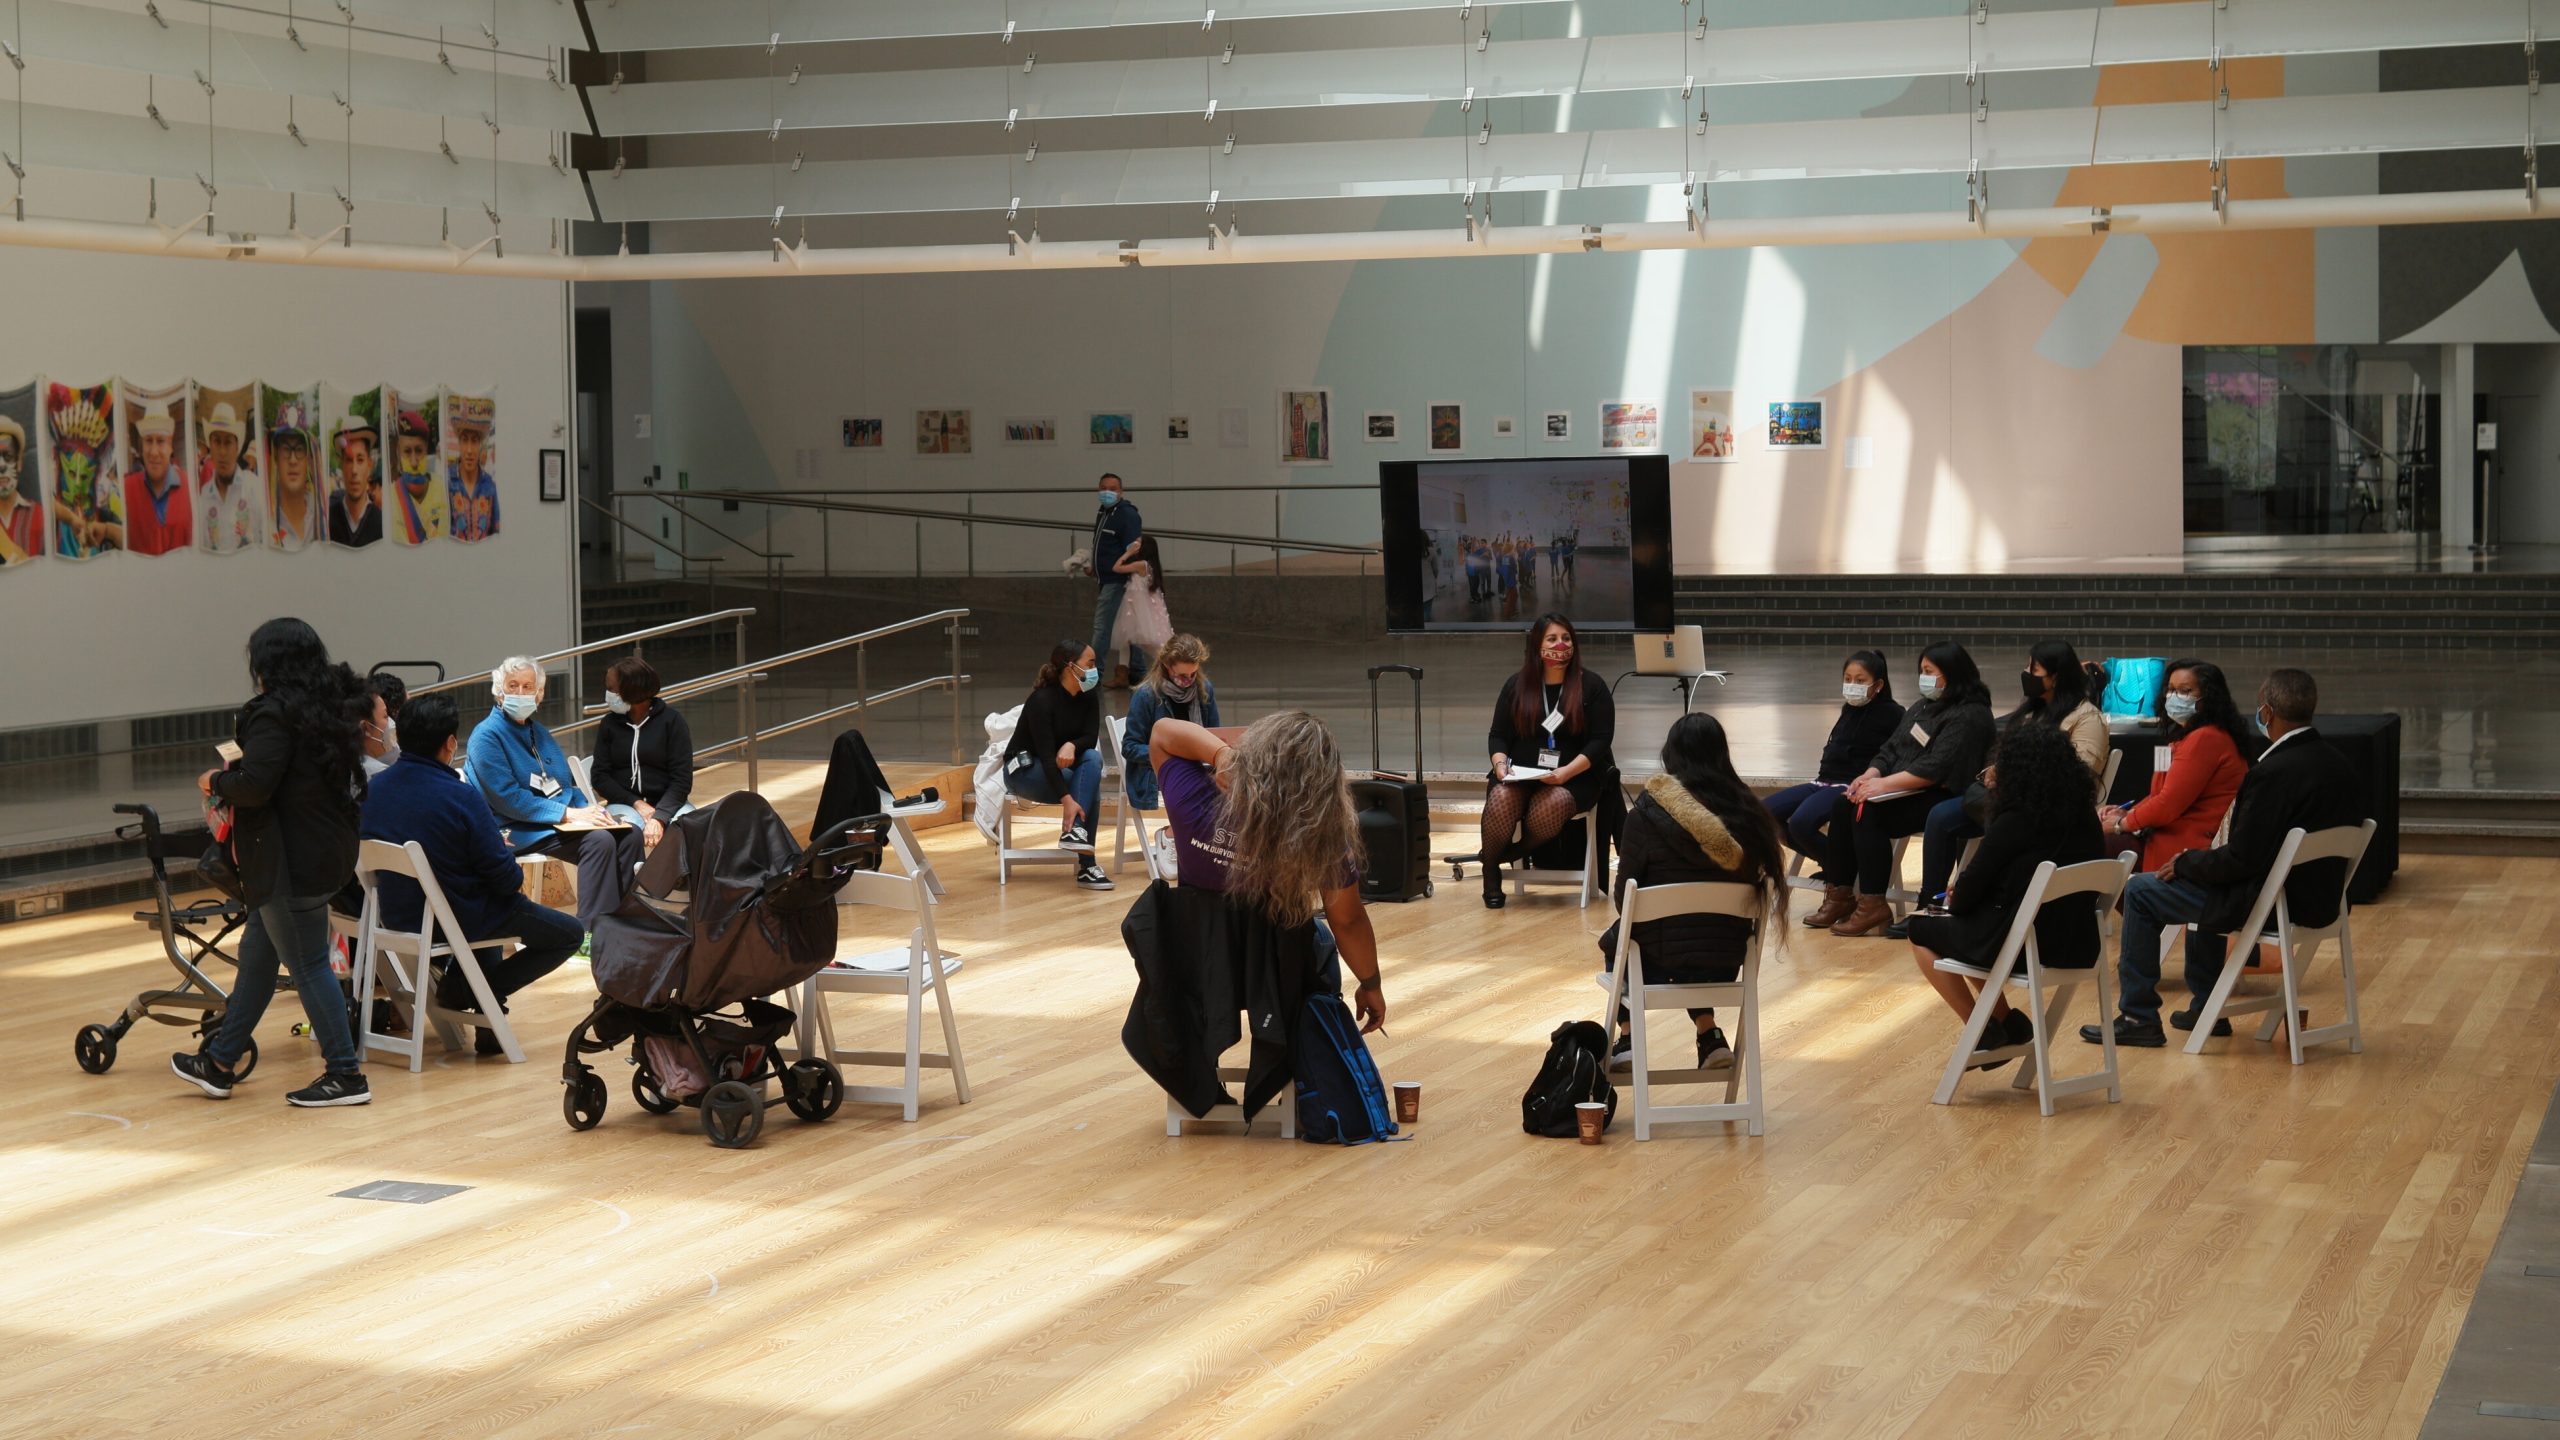 A photograph taken in mid-day during a focus group held at Queens Museum, one of the participatory design activities that took place during the Central Atrium for All project. A group of about 20 individuals wearing surgical masks are seated in a circle of wooden folding chairs, awash in a golden glow of filtered daylight from a skylight above. The diverse group includes older adults, individuals with walkers, caregivers, baby strollers, and white canes for low-vision individuals. The group is in active discussion with a facilitator, who sits in front of an amplifier and large digital TV monitor that depicts children on a tour of the museum.